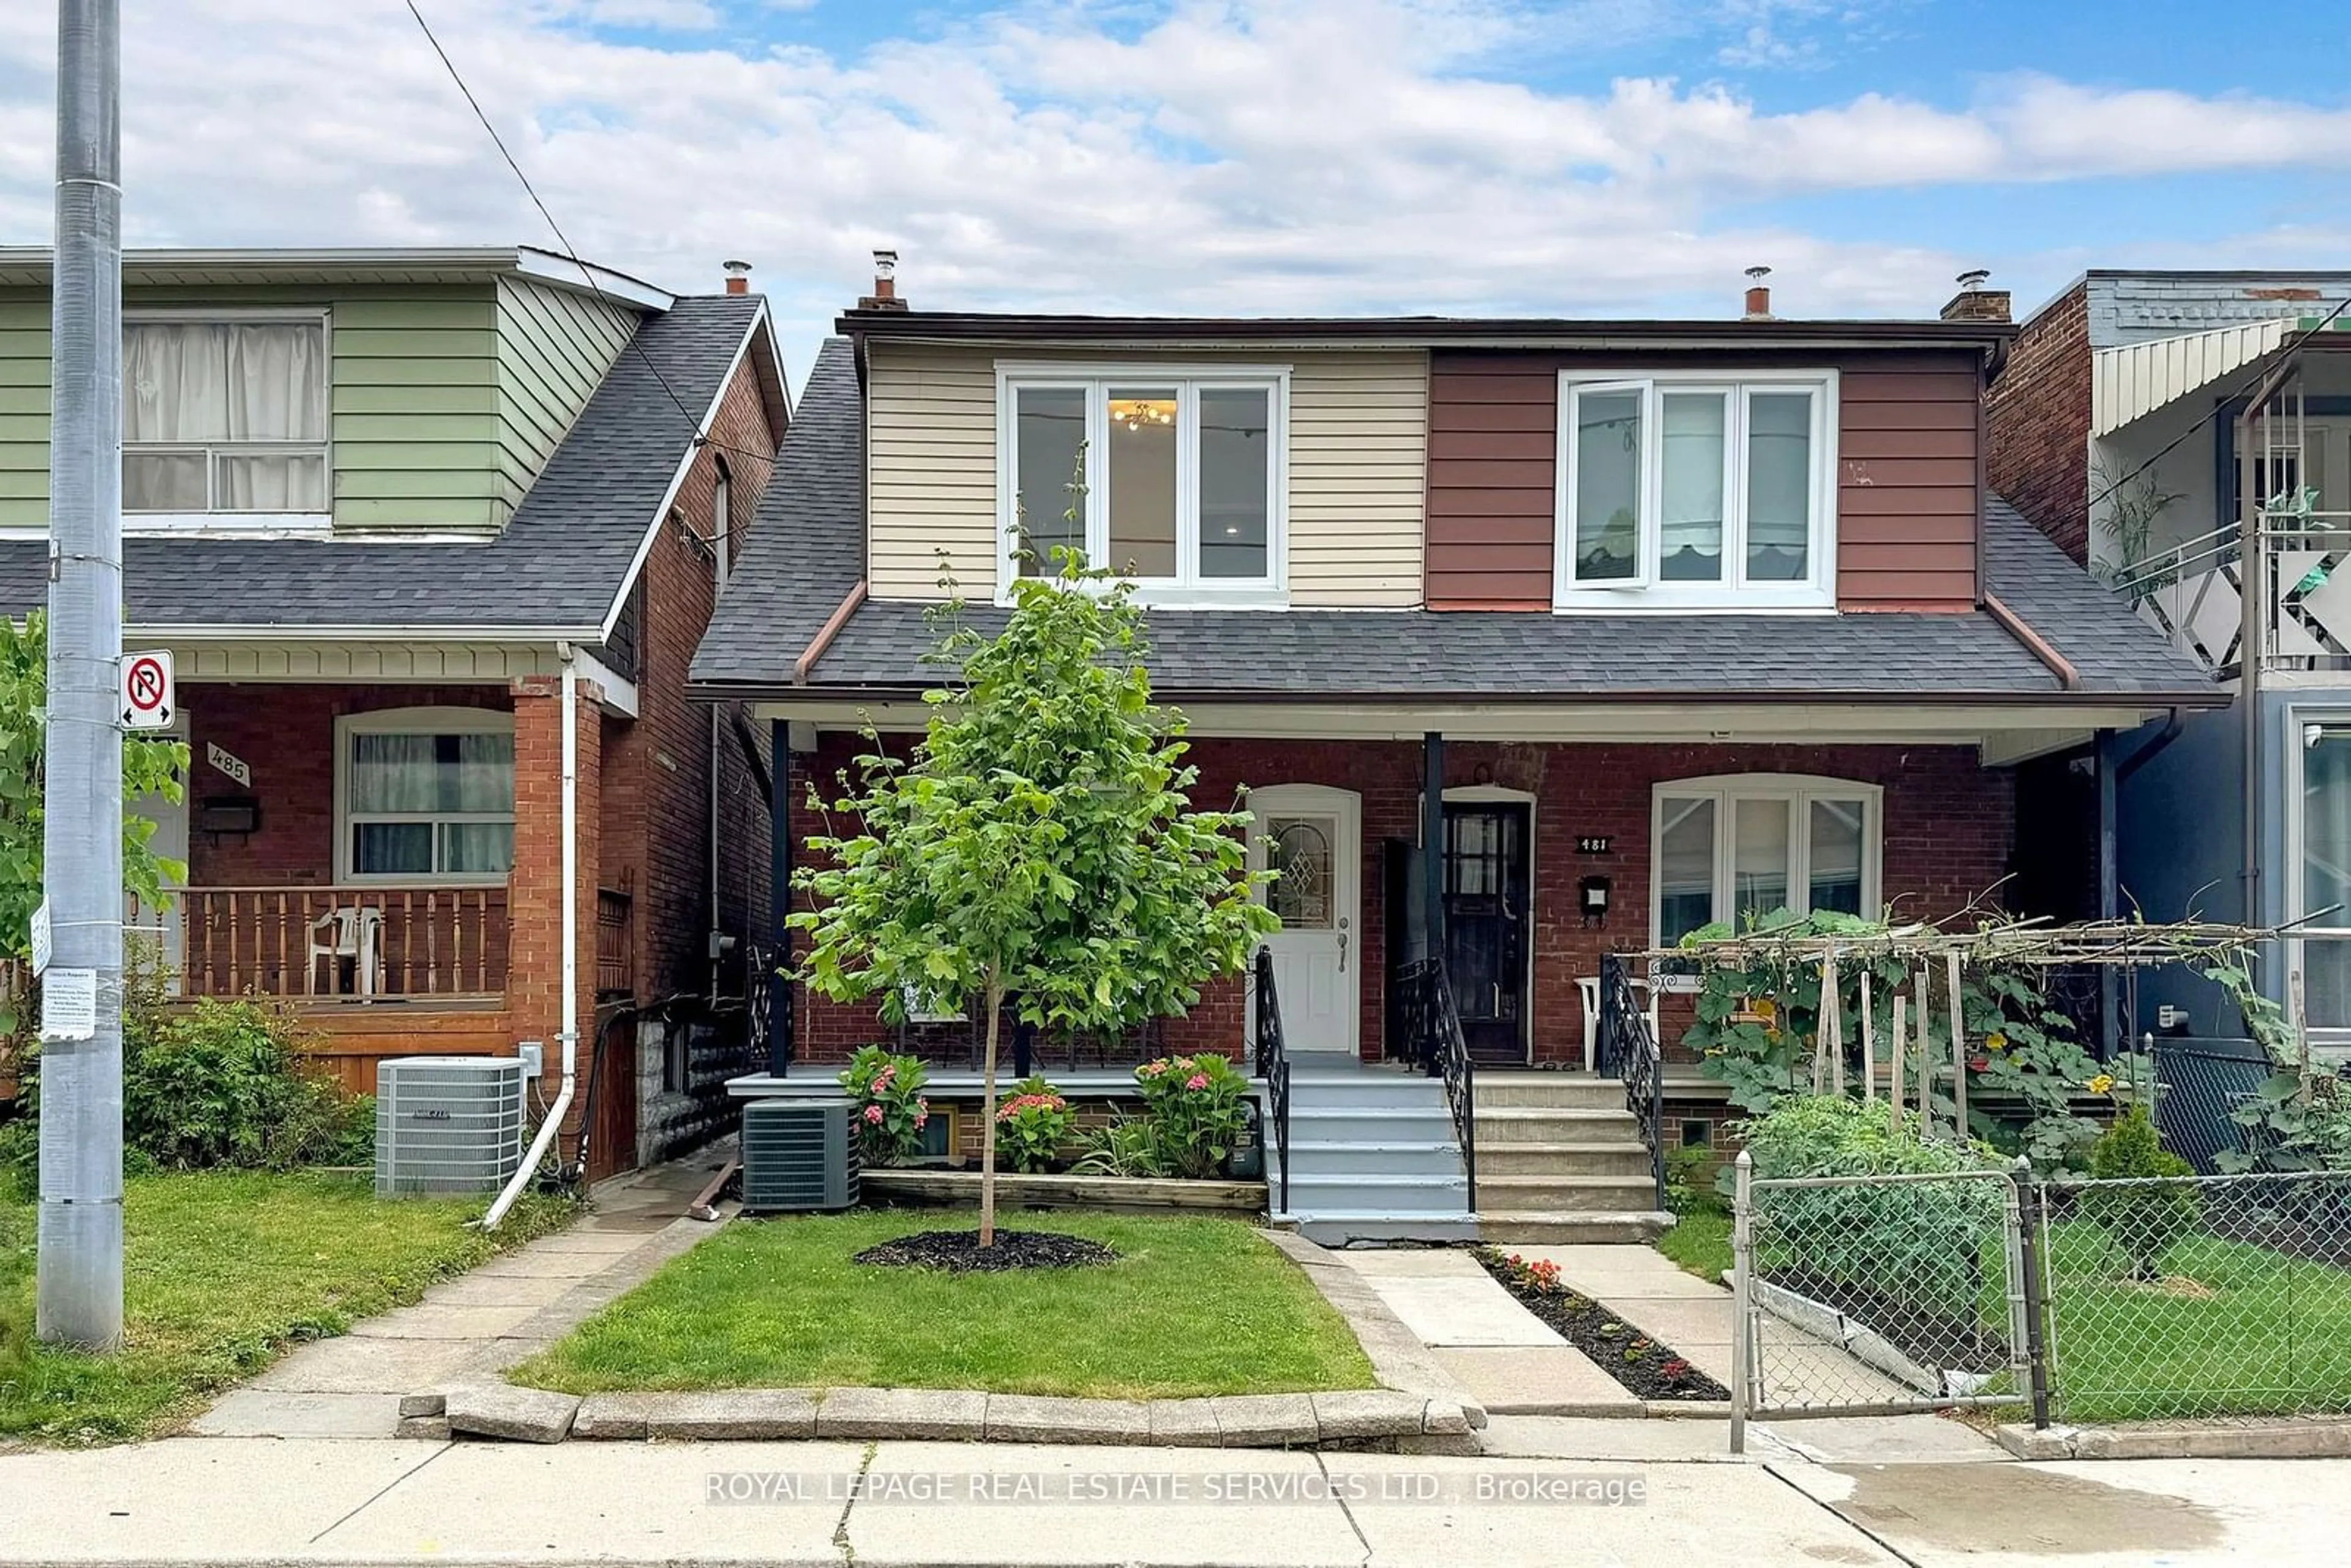 Home with brick exterior material for 483 Westmount Ave, Toronto Ontario M6E 3N6